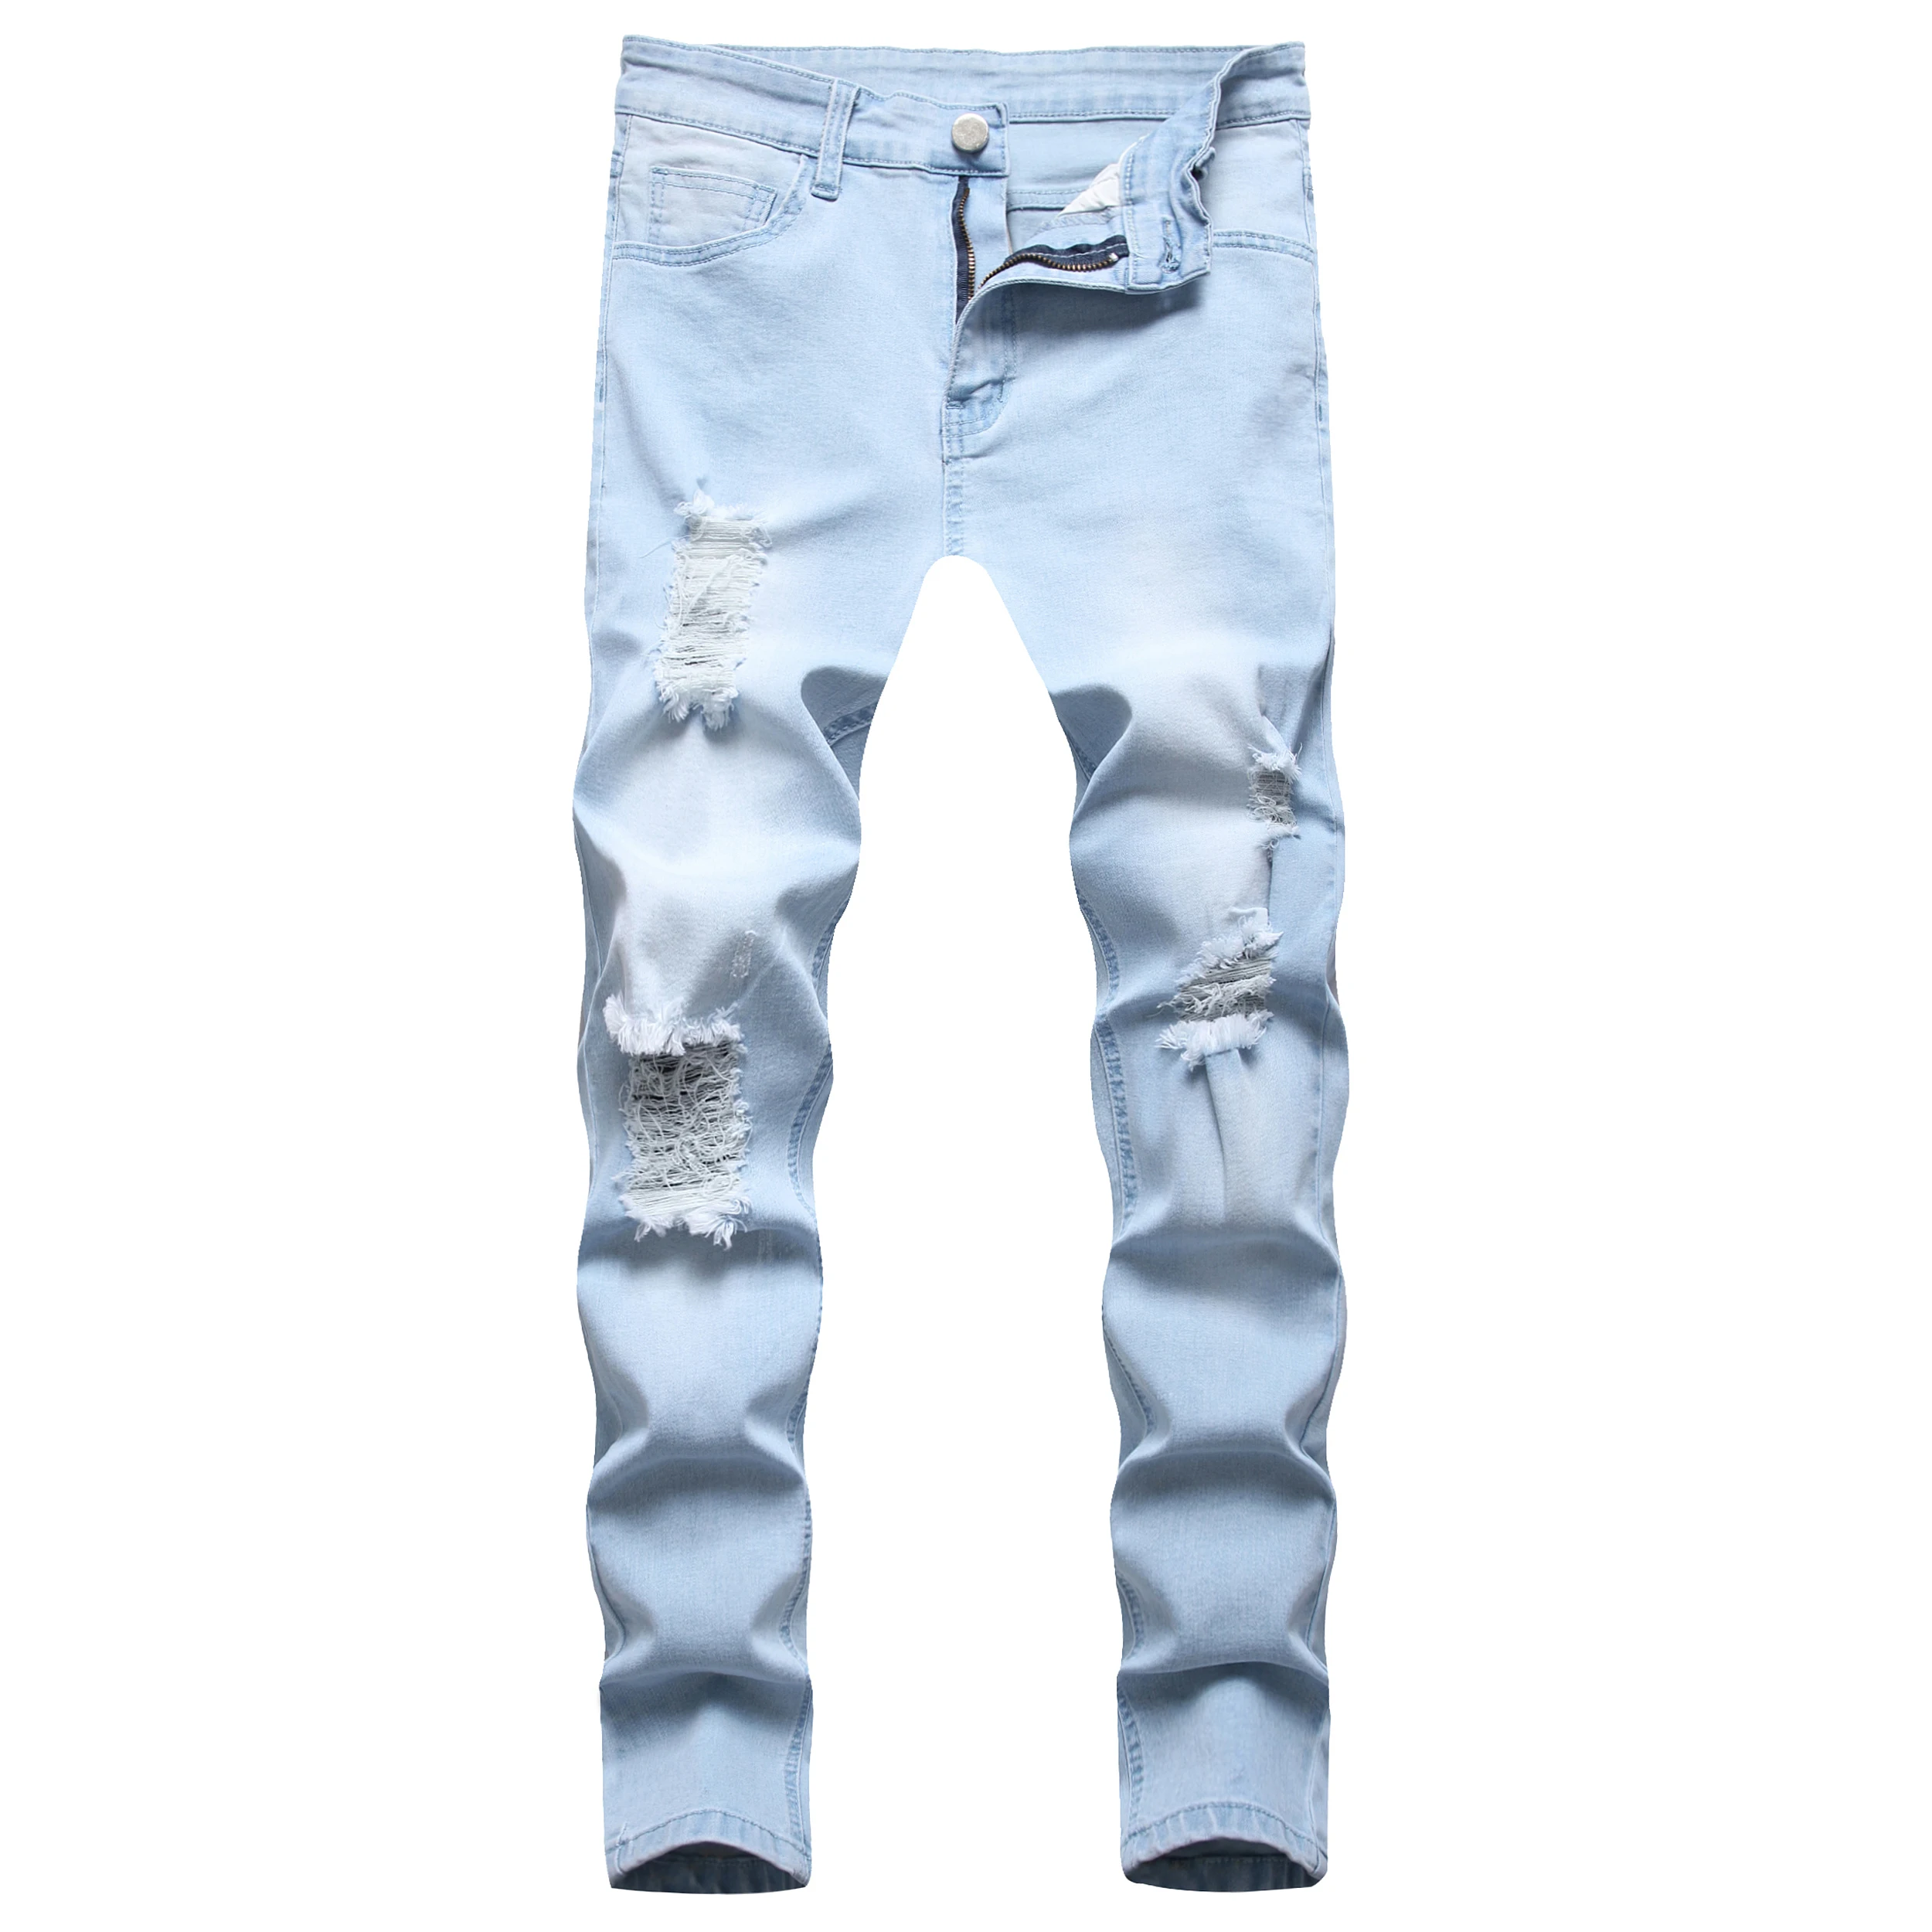 

Men Ripped Jeans Distressed Destroyed Slim Fit Denim Pants Skinny Stretch Jean Trousers with Broken Holes